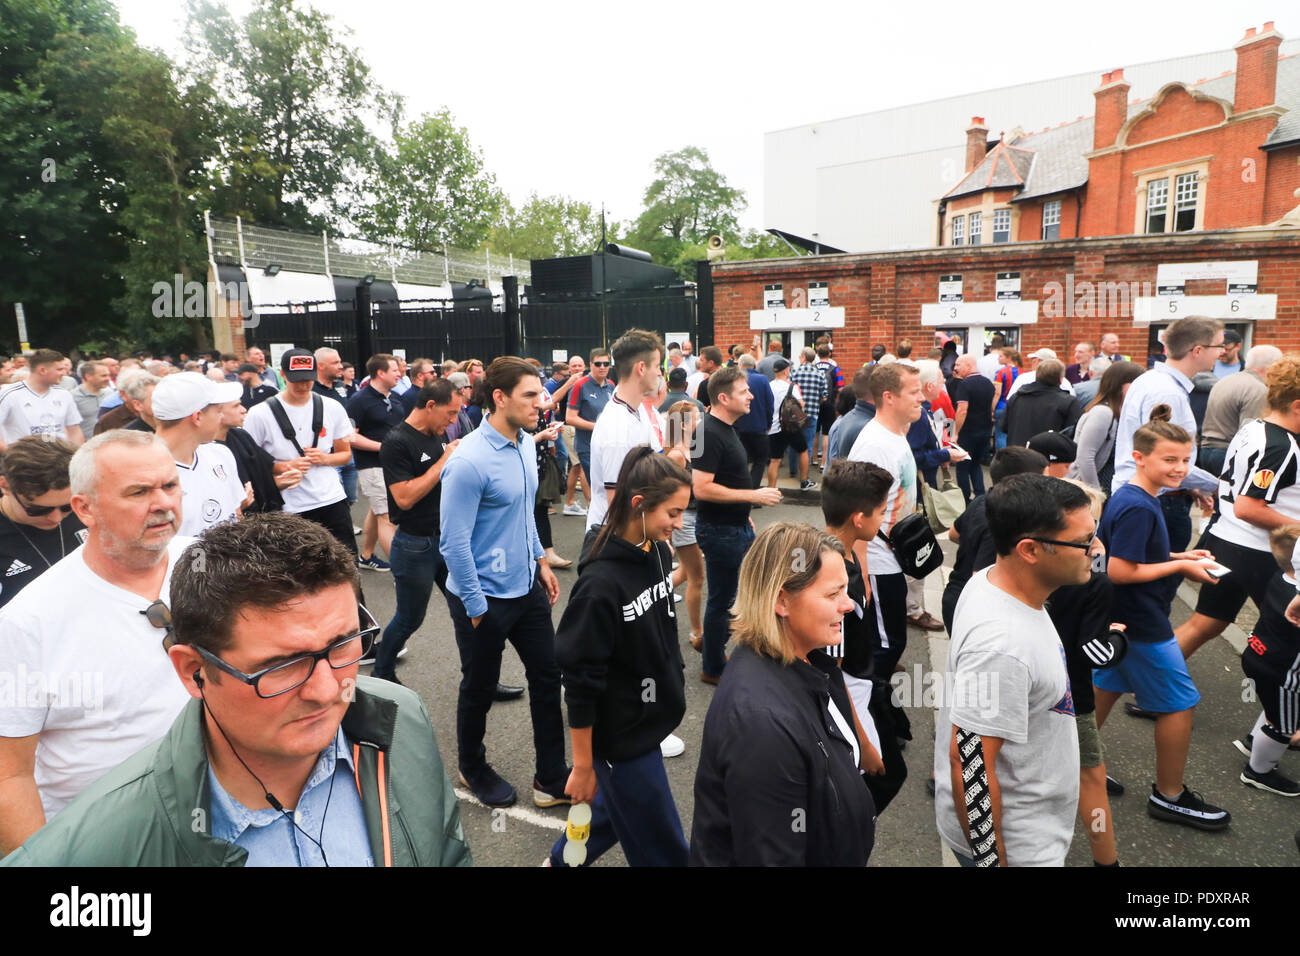 London UK. 11th August 2018. Thousands of Fans arrive at the Craven Cottage stadium in West London on the opening day of the English Premier League match between Fulham"Cottagers and Cyrstal Palace 'Eagles" Stock Photo